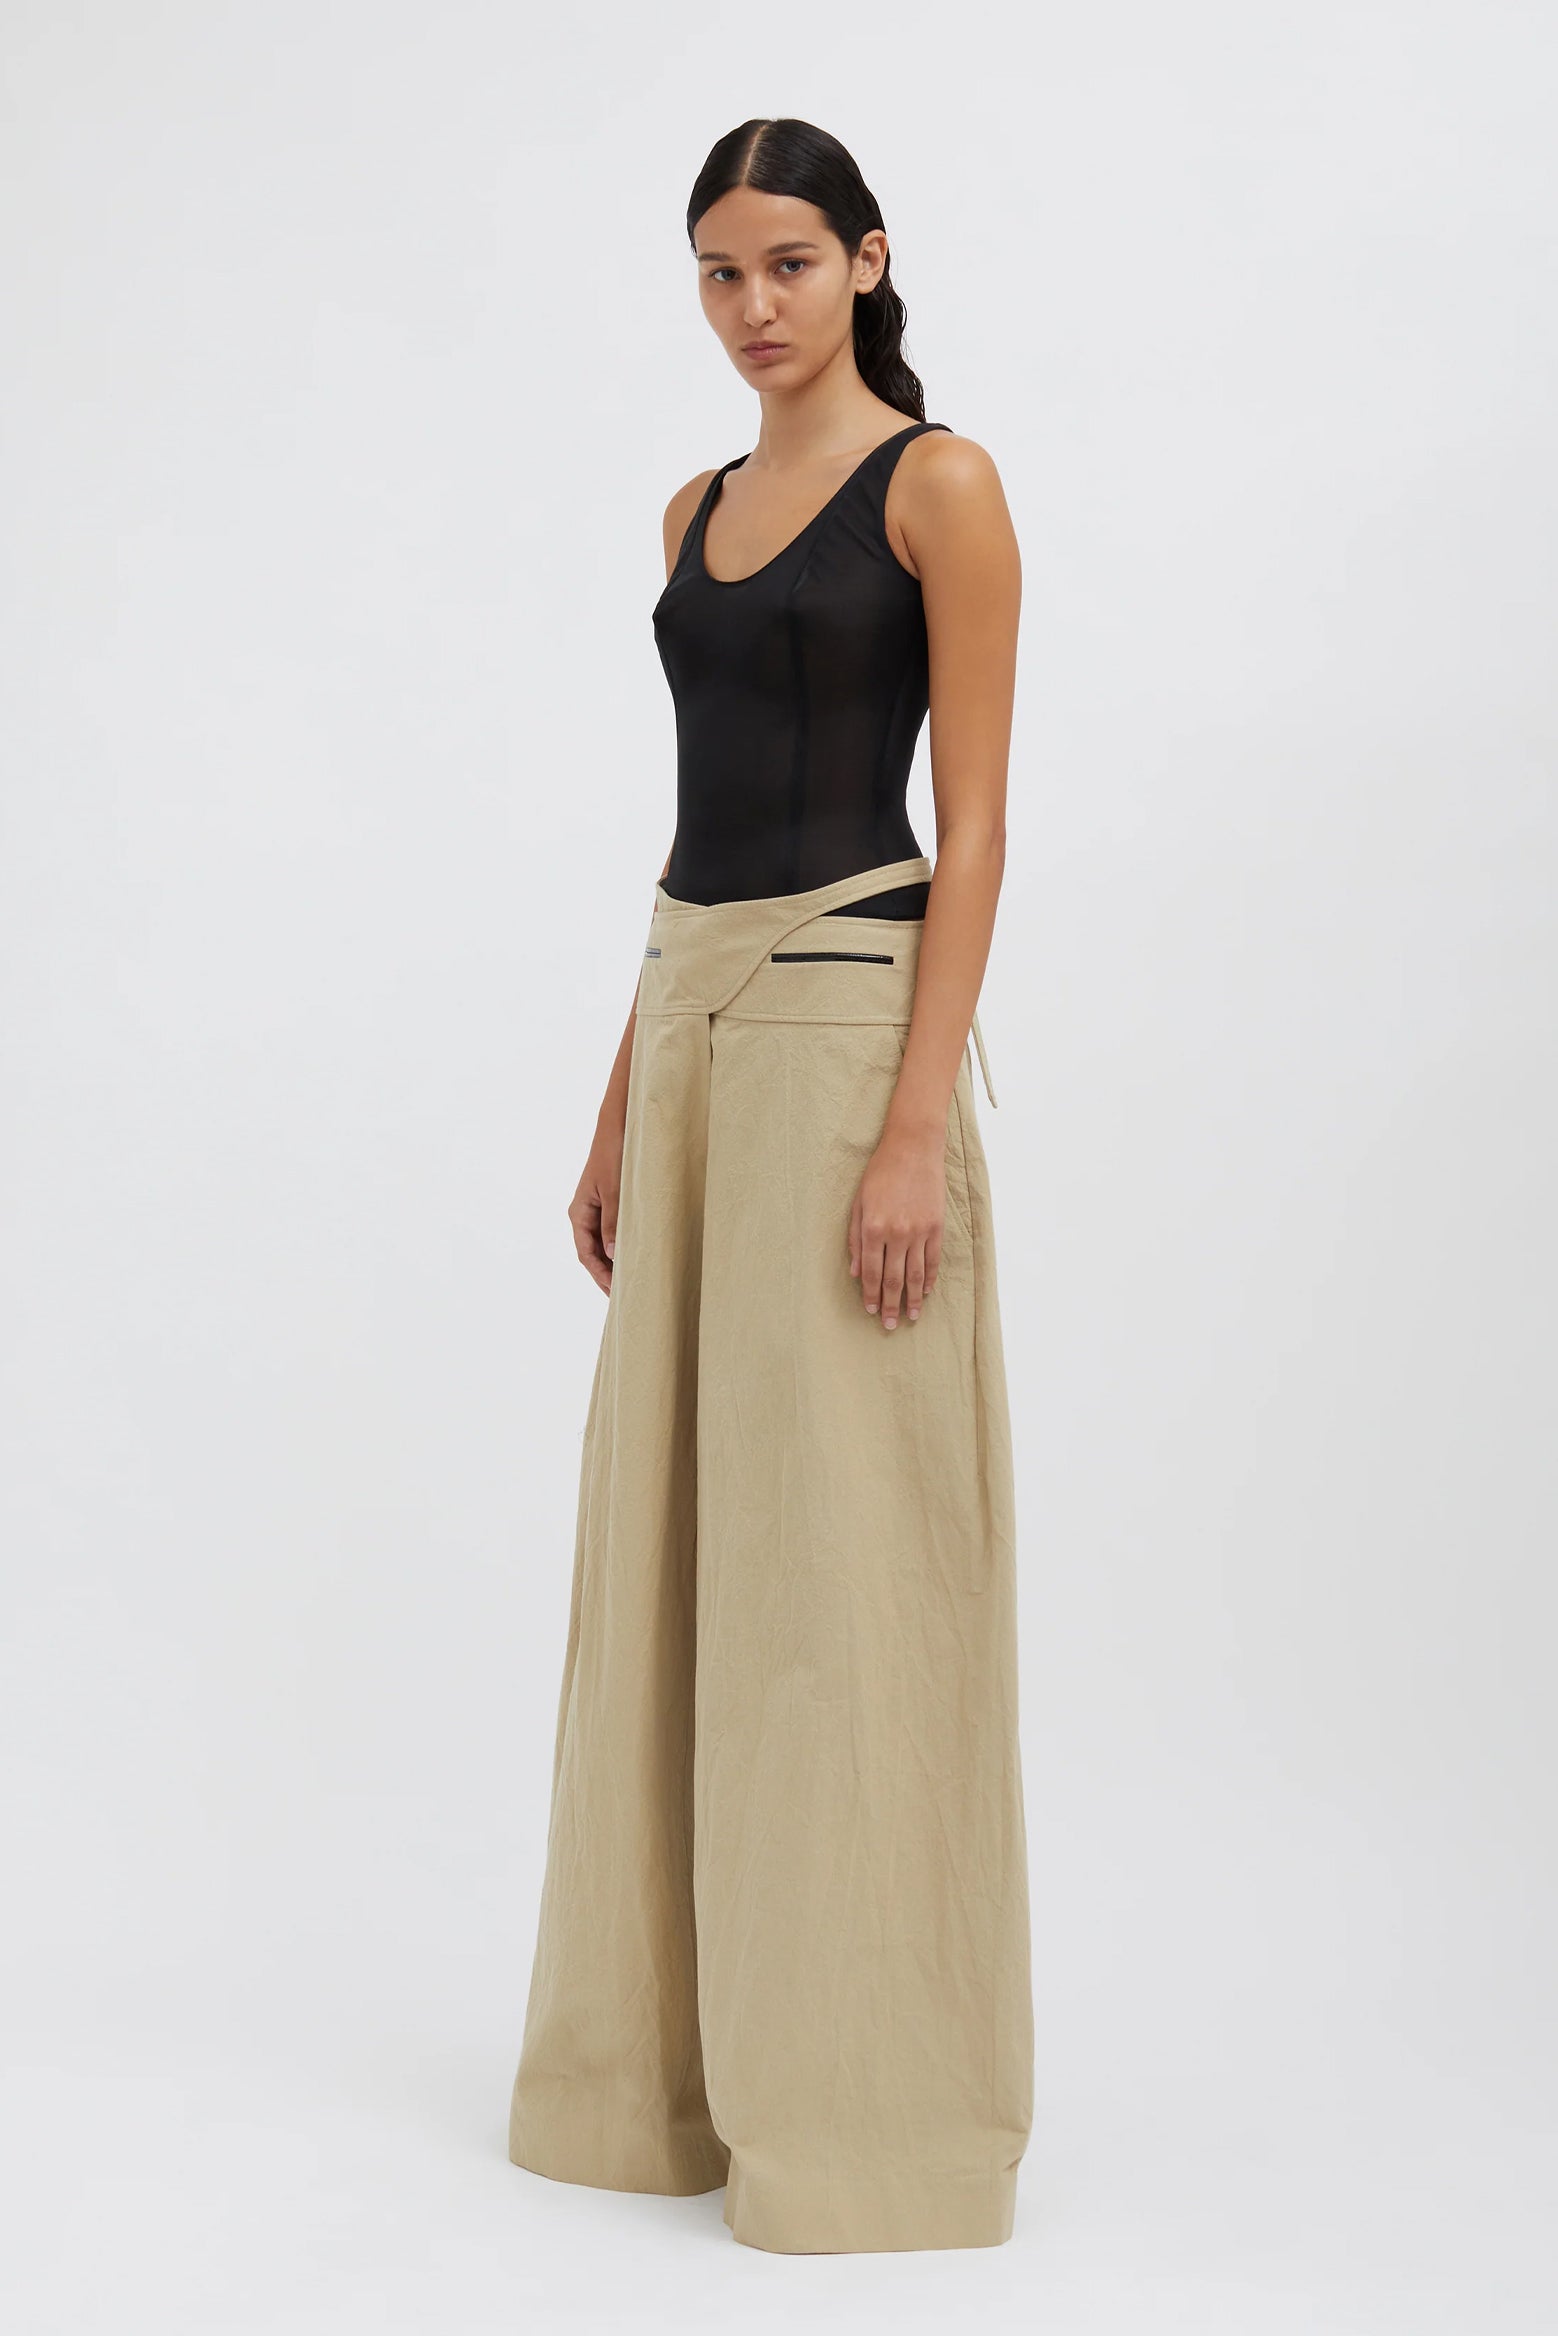 Christopher Esber Mason Bind Trouser in Stone available at The New Trend Australia.